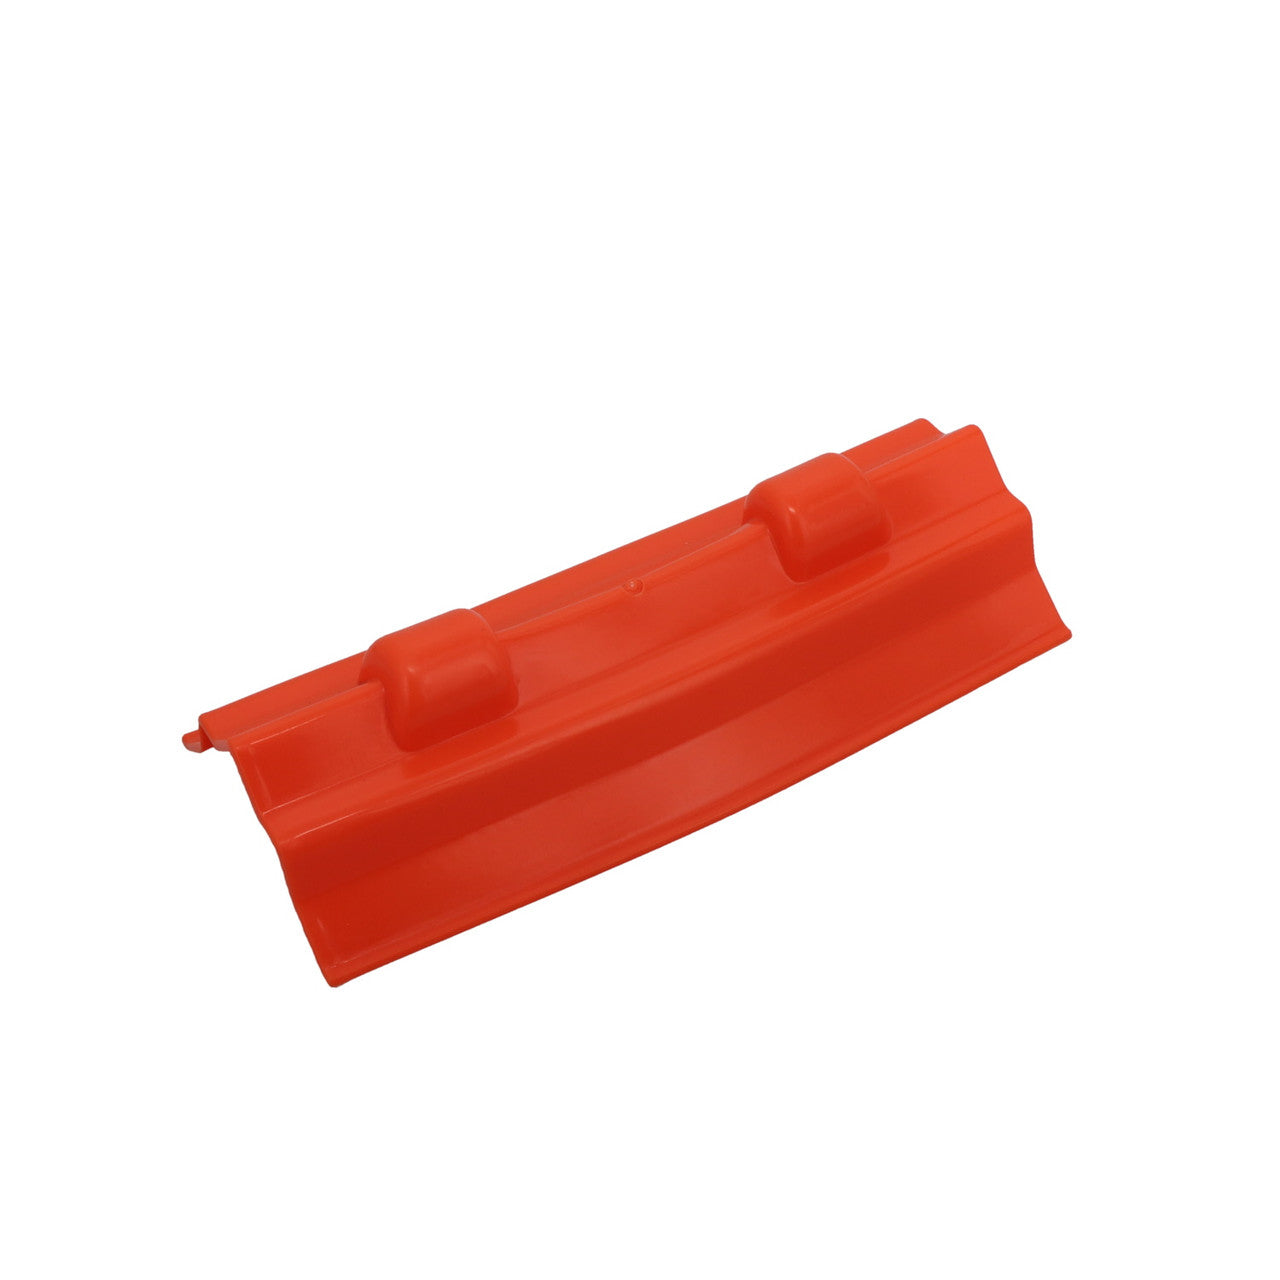 Kinedyne Plastic Corner Protector for Straps and Chain